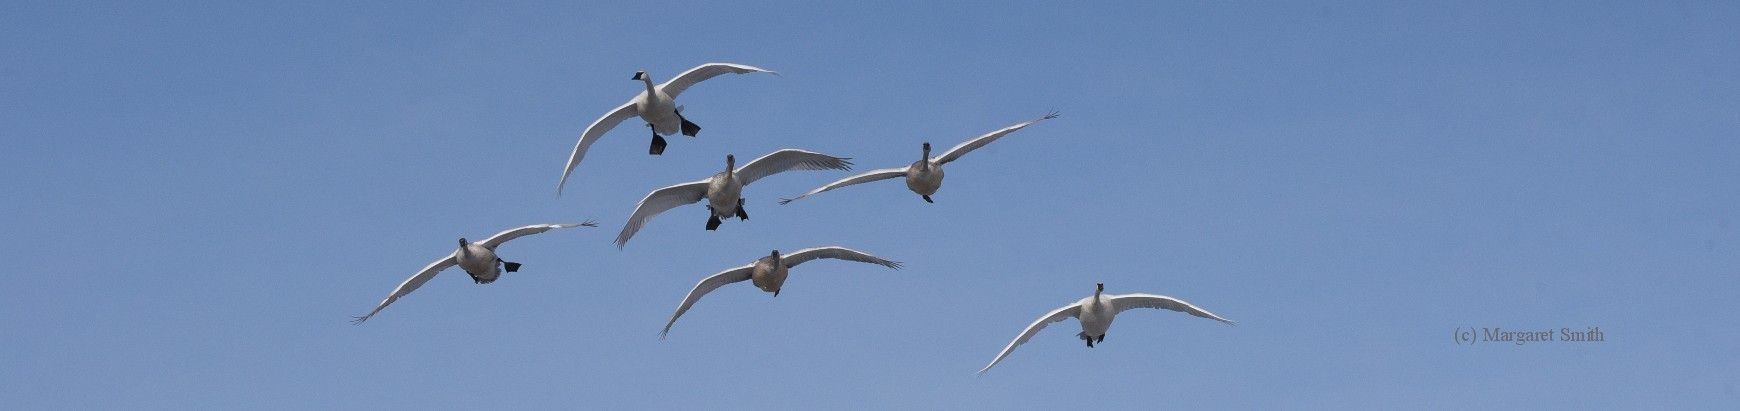 The Trumpeter Swan Blog has lots of information about swans, issues and updates